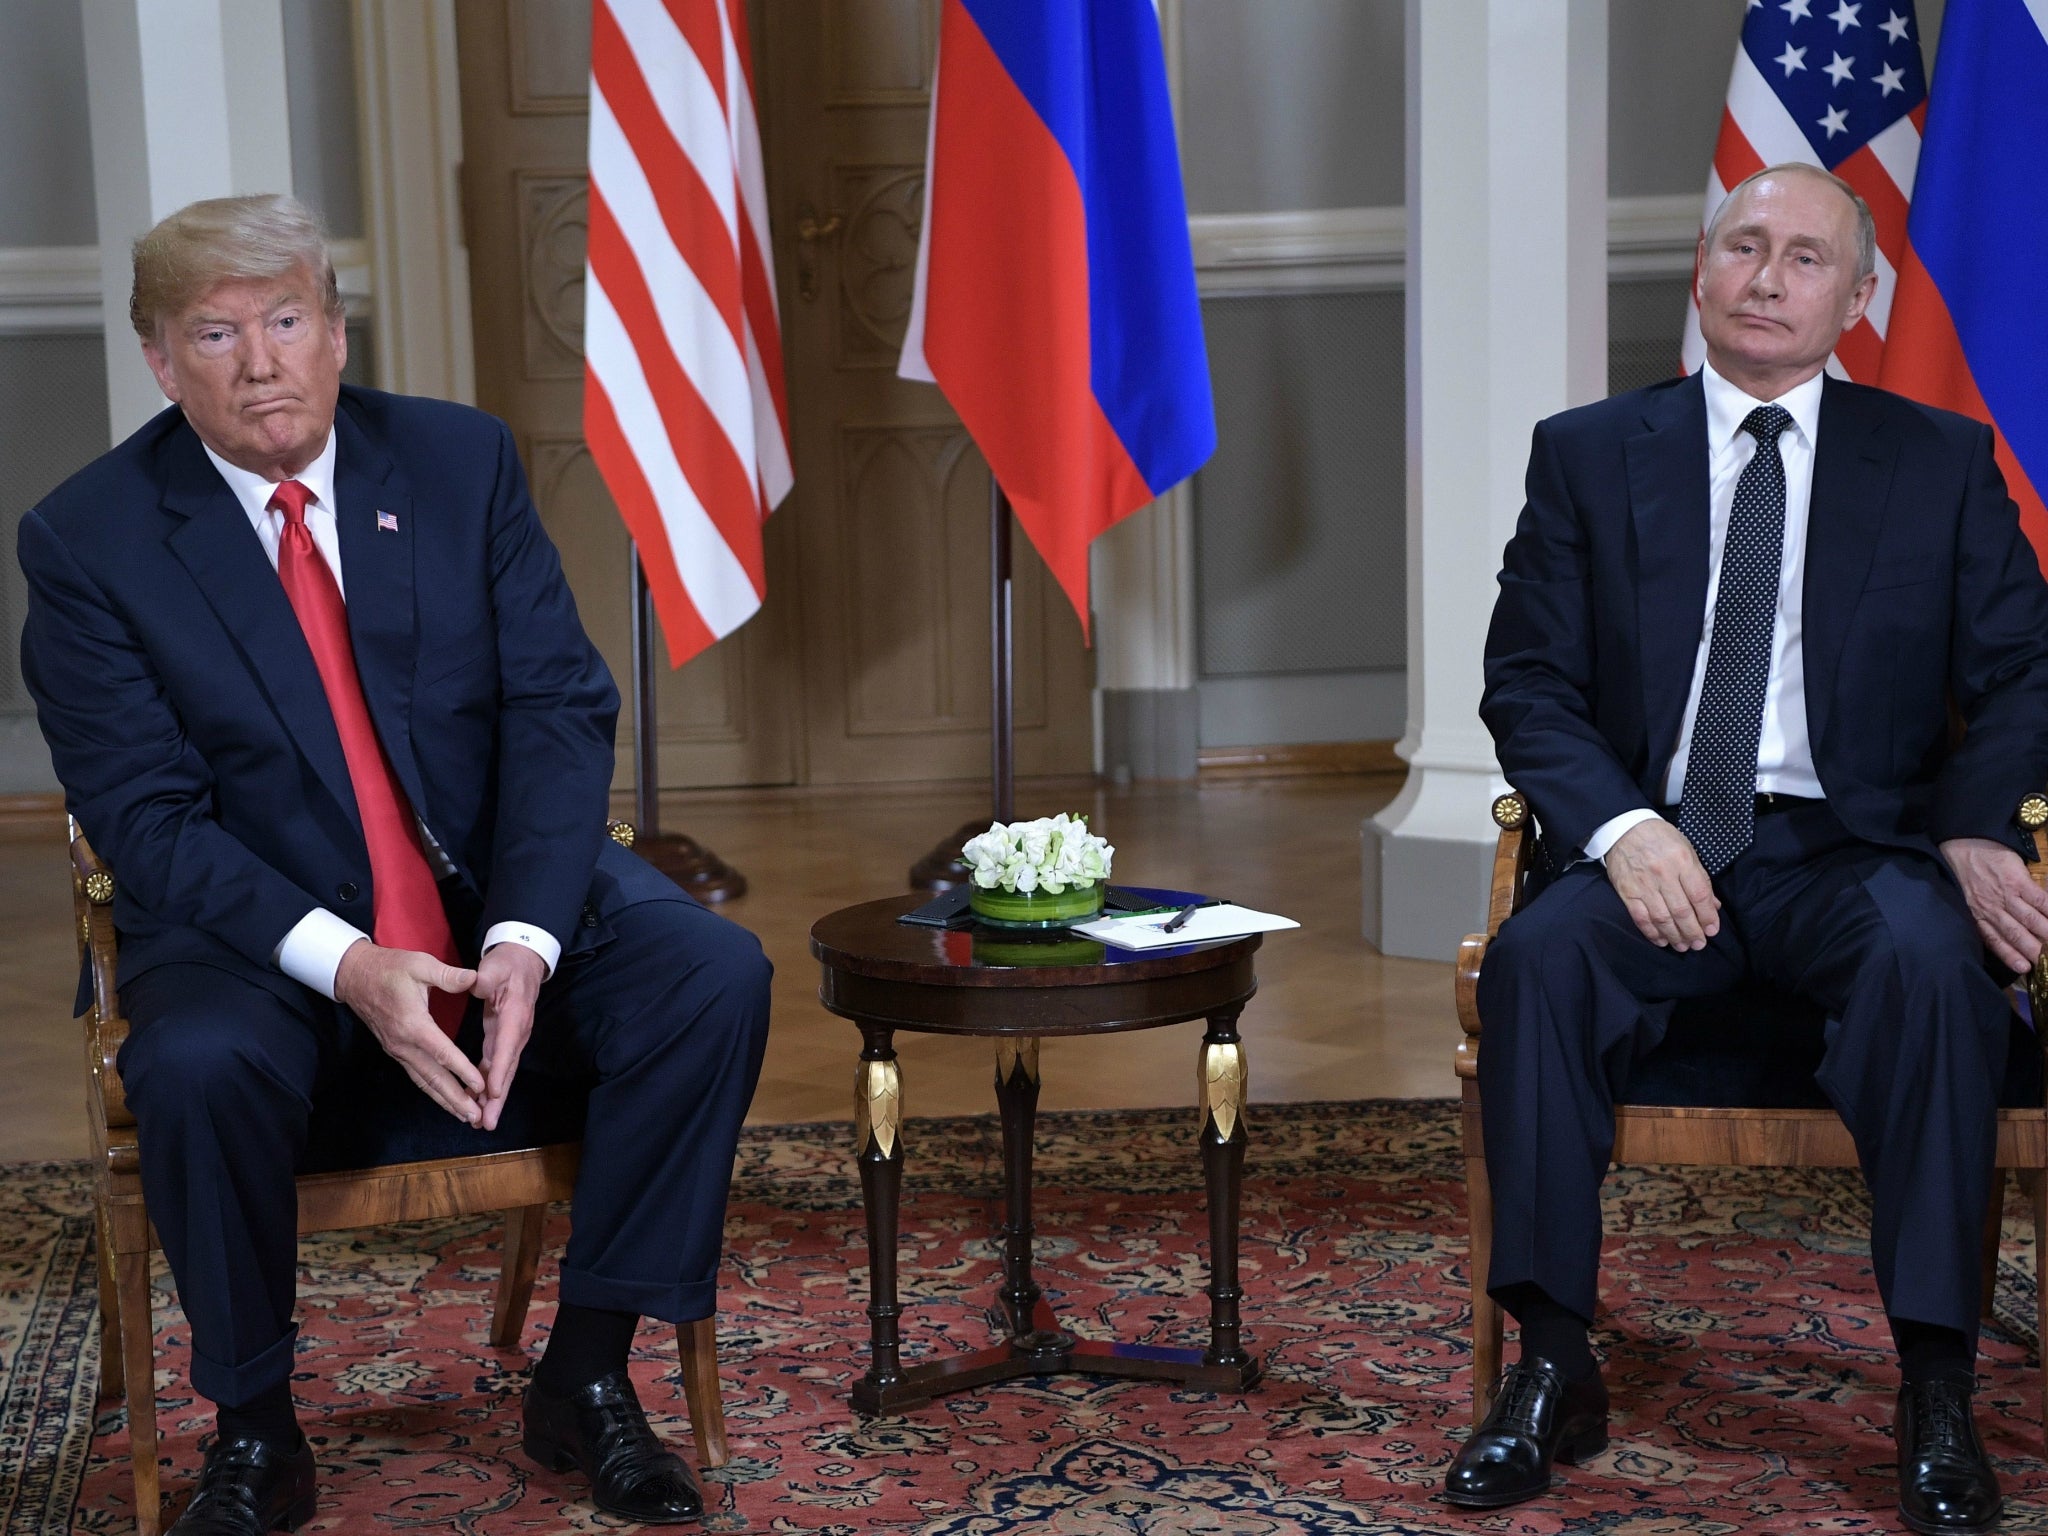 According to an Irish bookmaker, US President Donald Trump is more likely to be impeached after his meeting with Russia's President Vladimir Putin in Helsinki, on 16 July 2018.